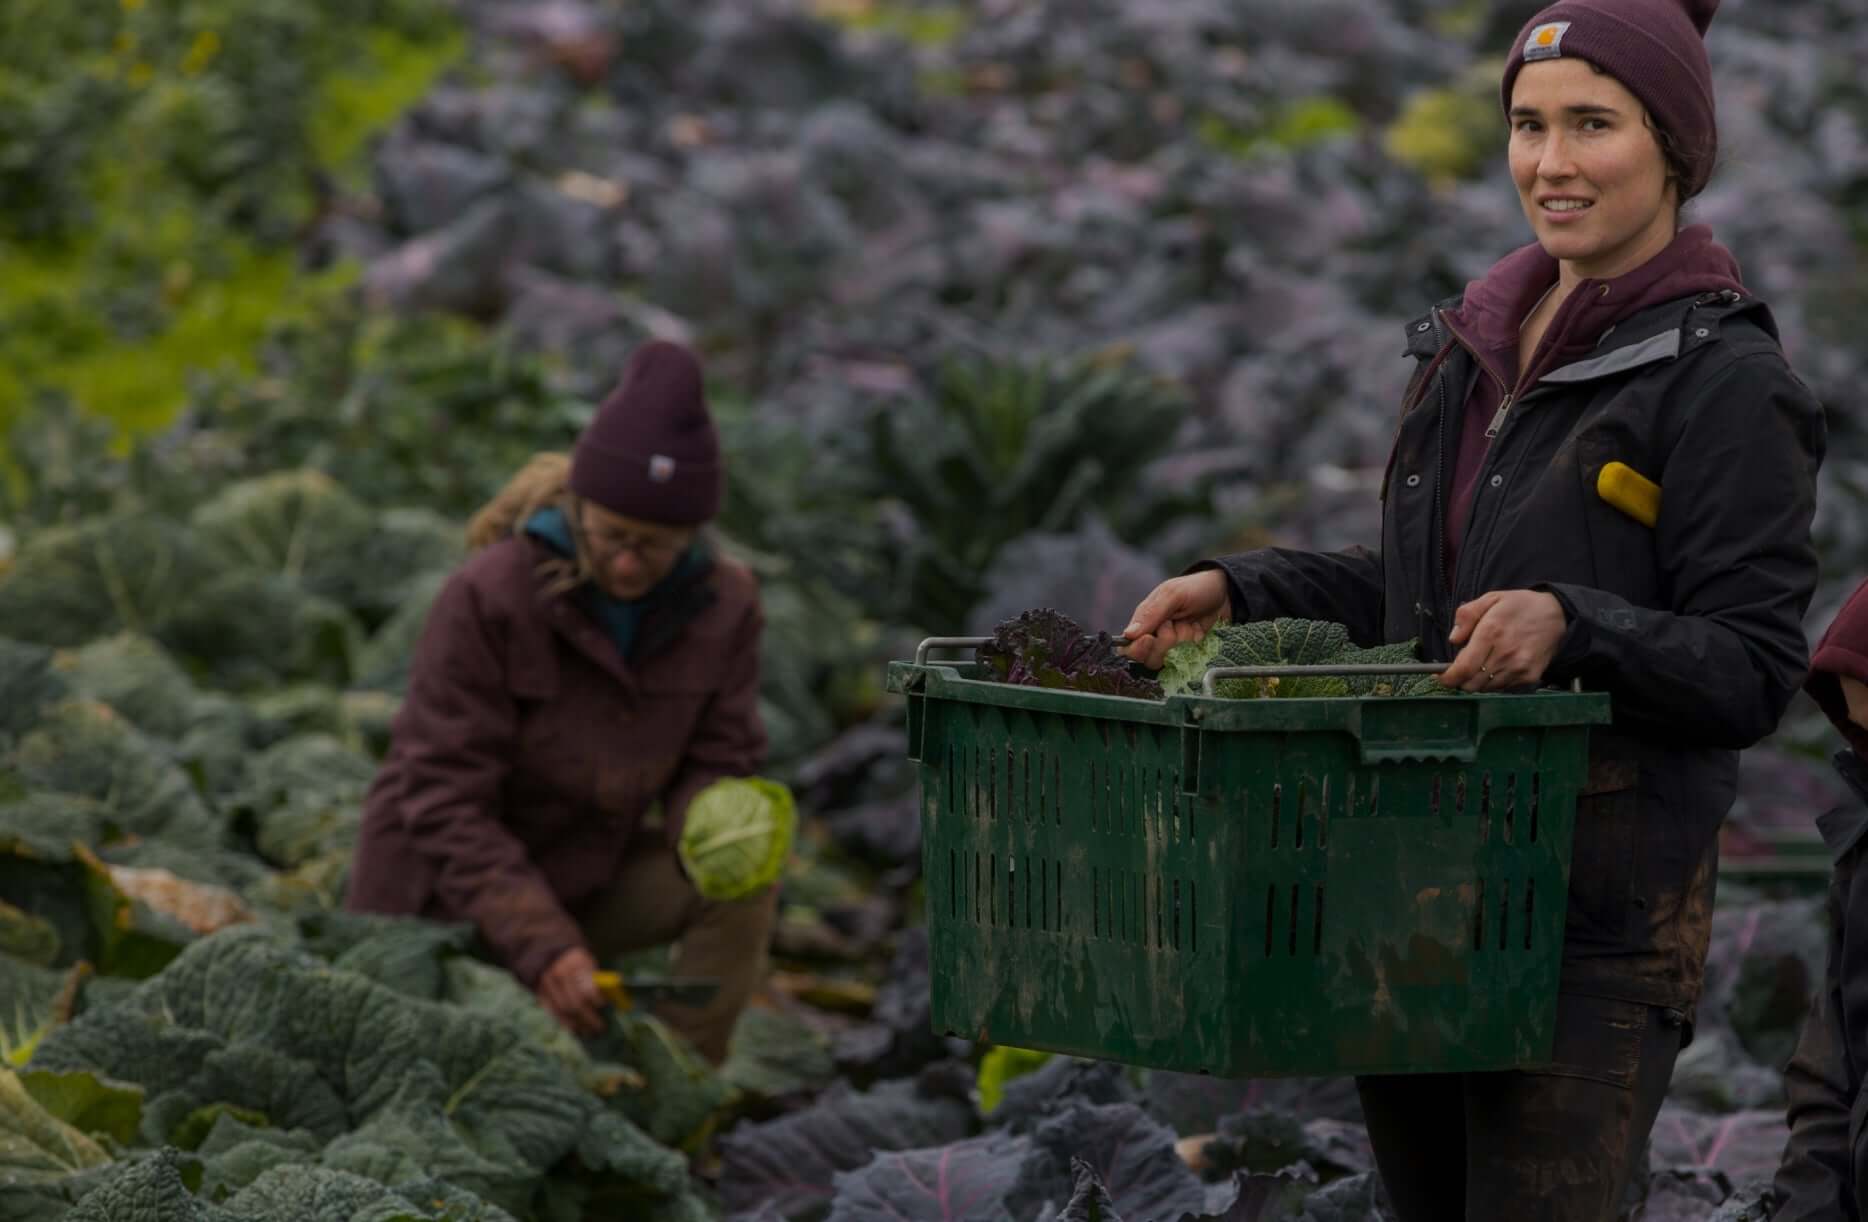 Dressed in Carhartt workwear, two farmers harvest cabbages